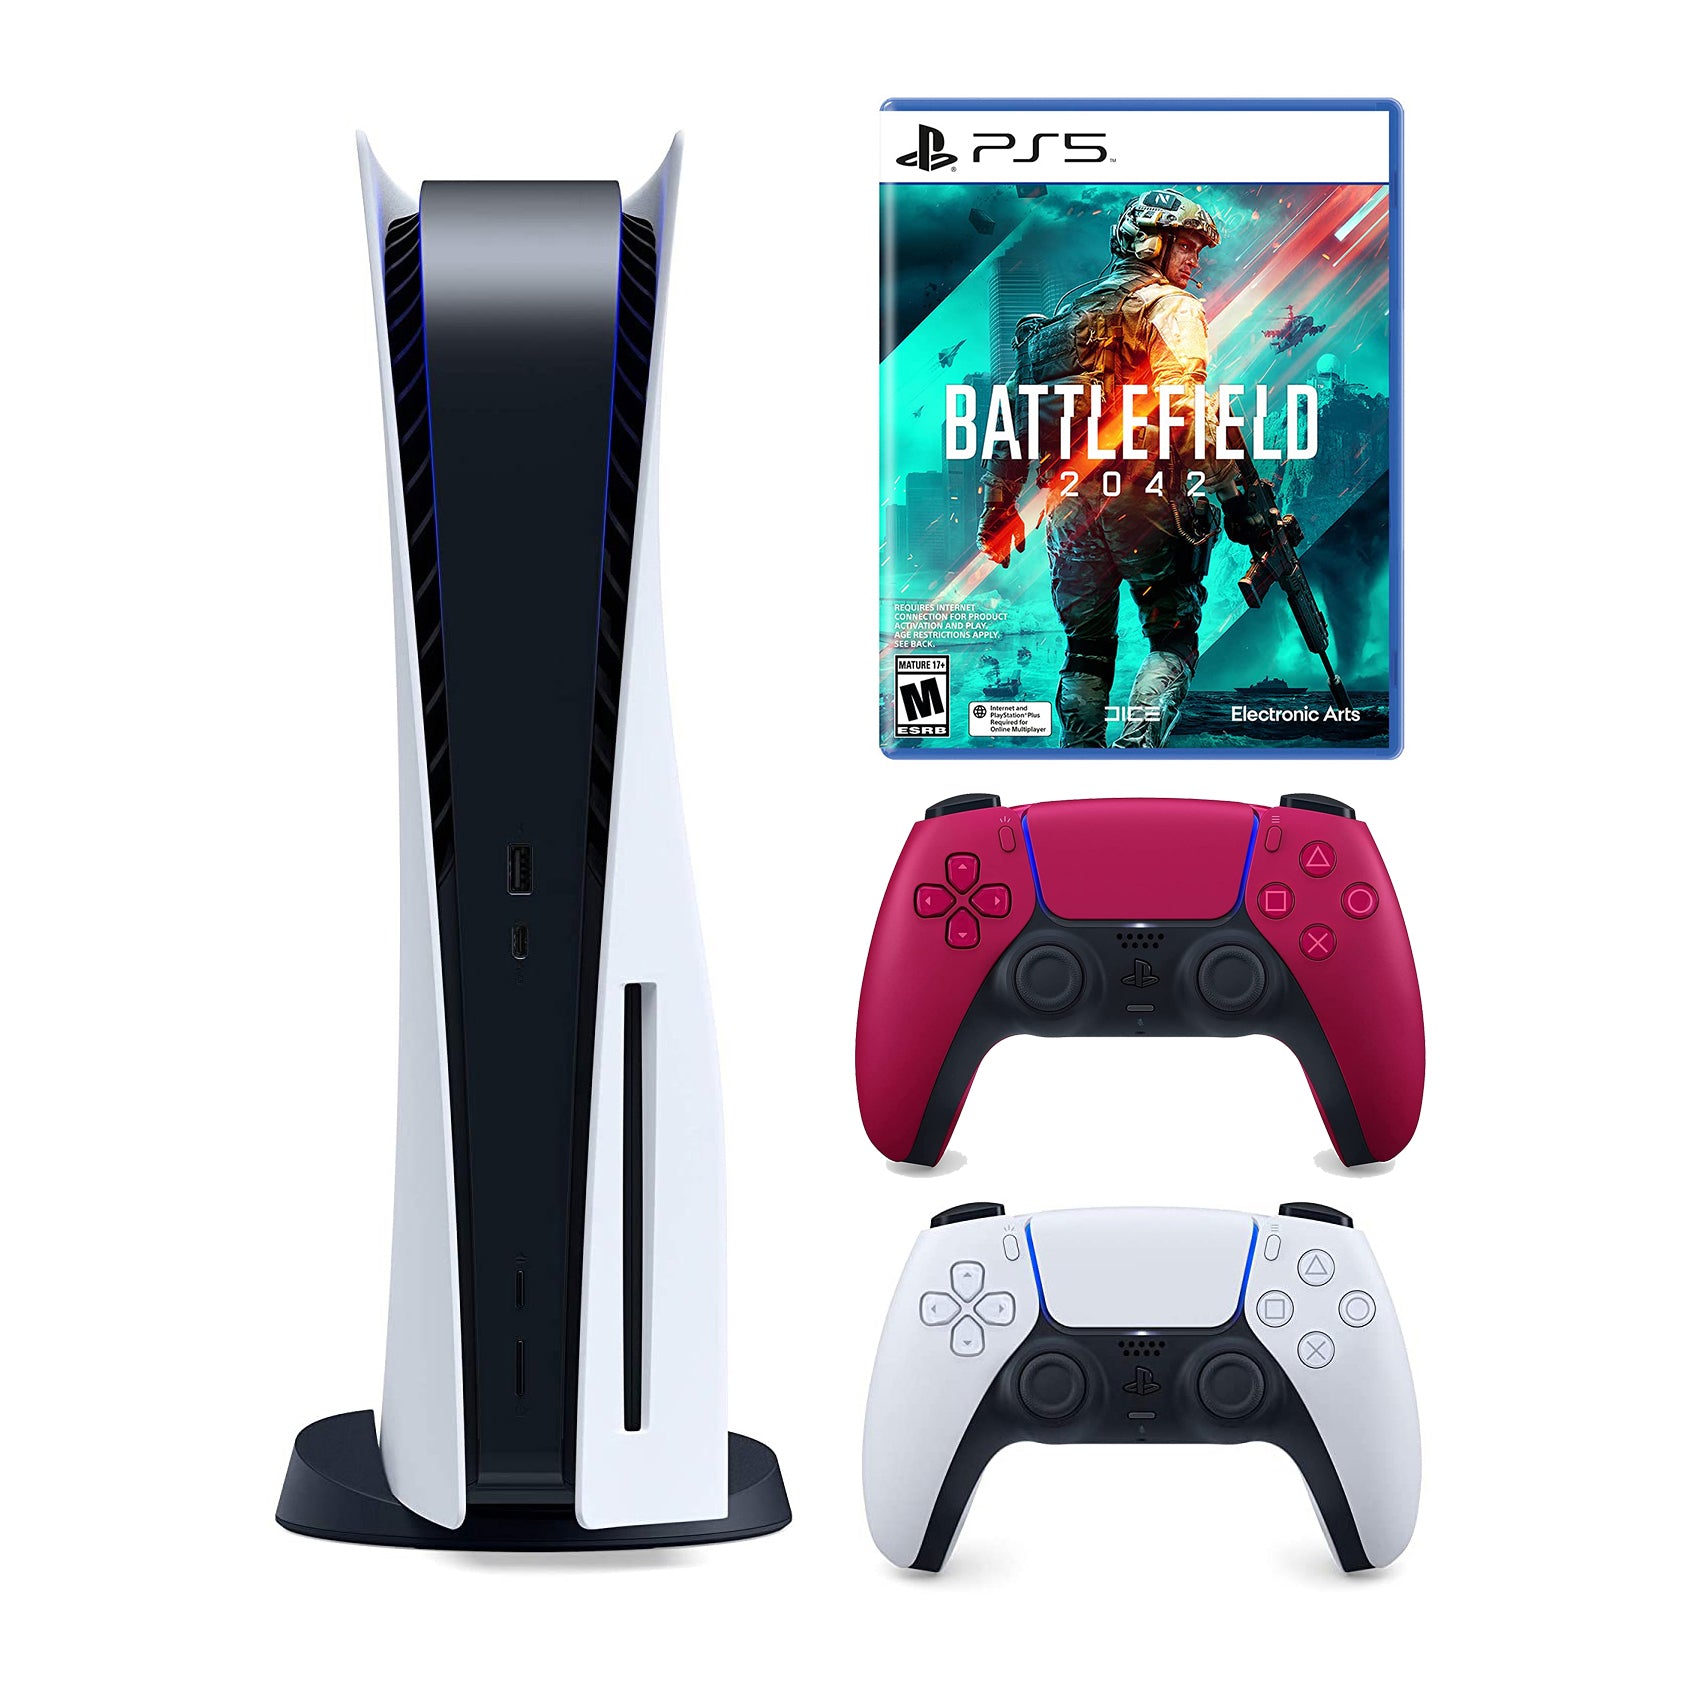 Sony Playstation 5 Disc Version (Sony PS5 Disc) with Cosmic Red Extra Controller, Battlefield 2042 - Pro-Distributing